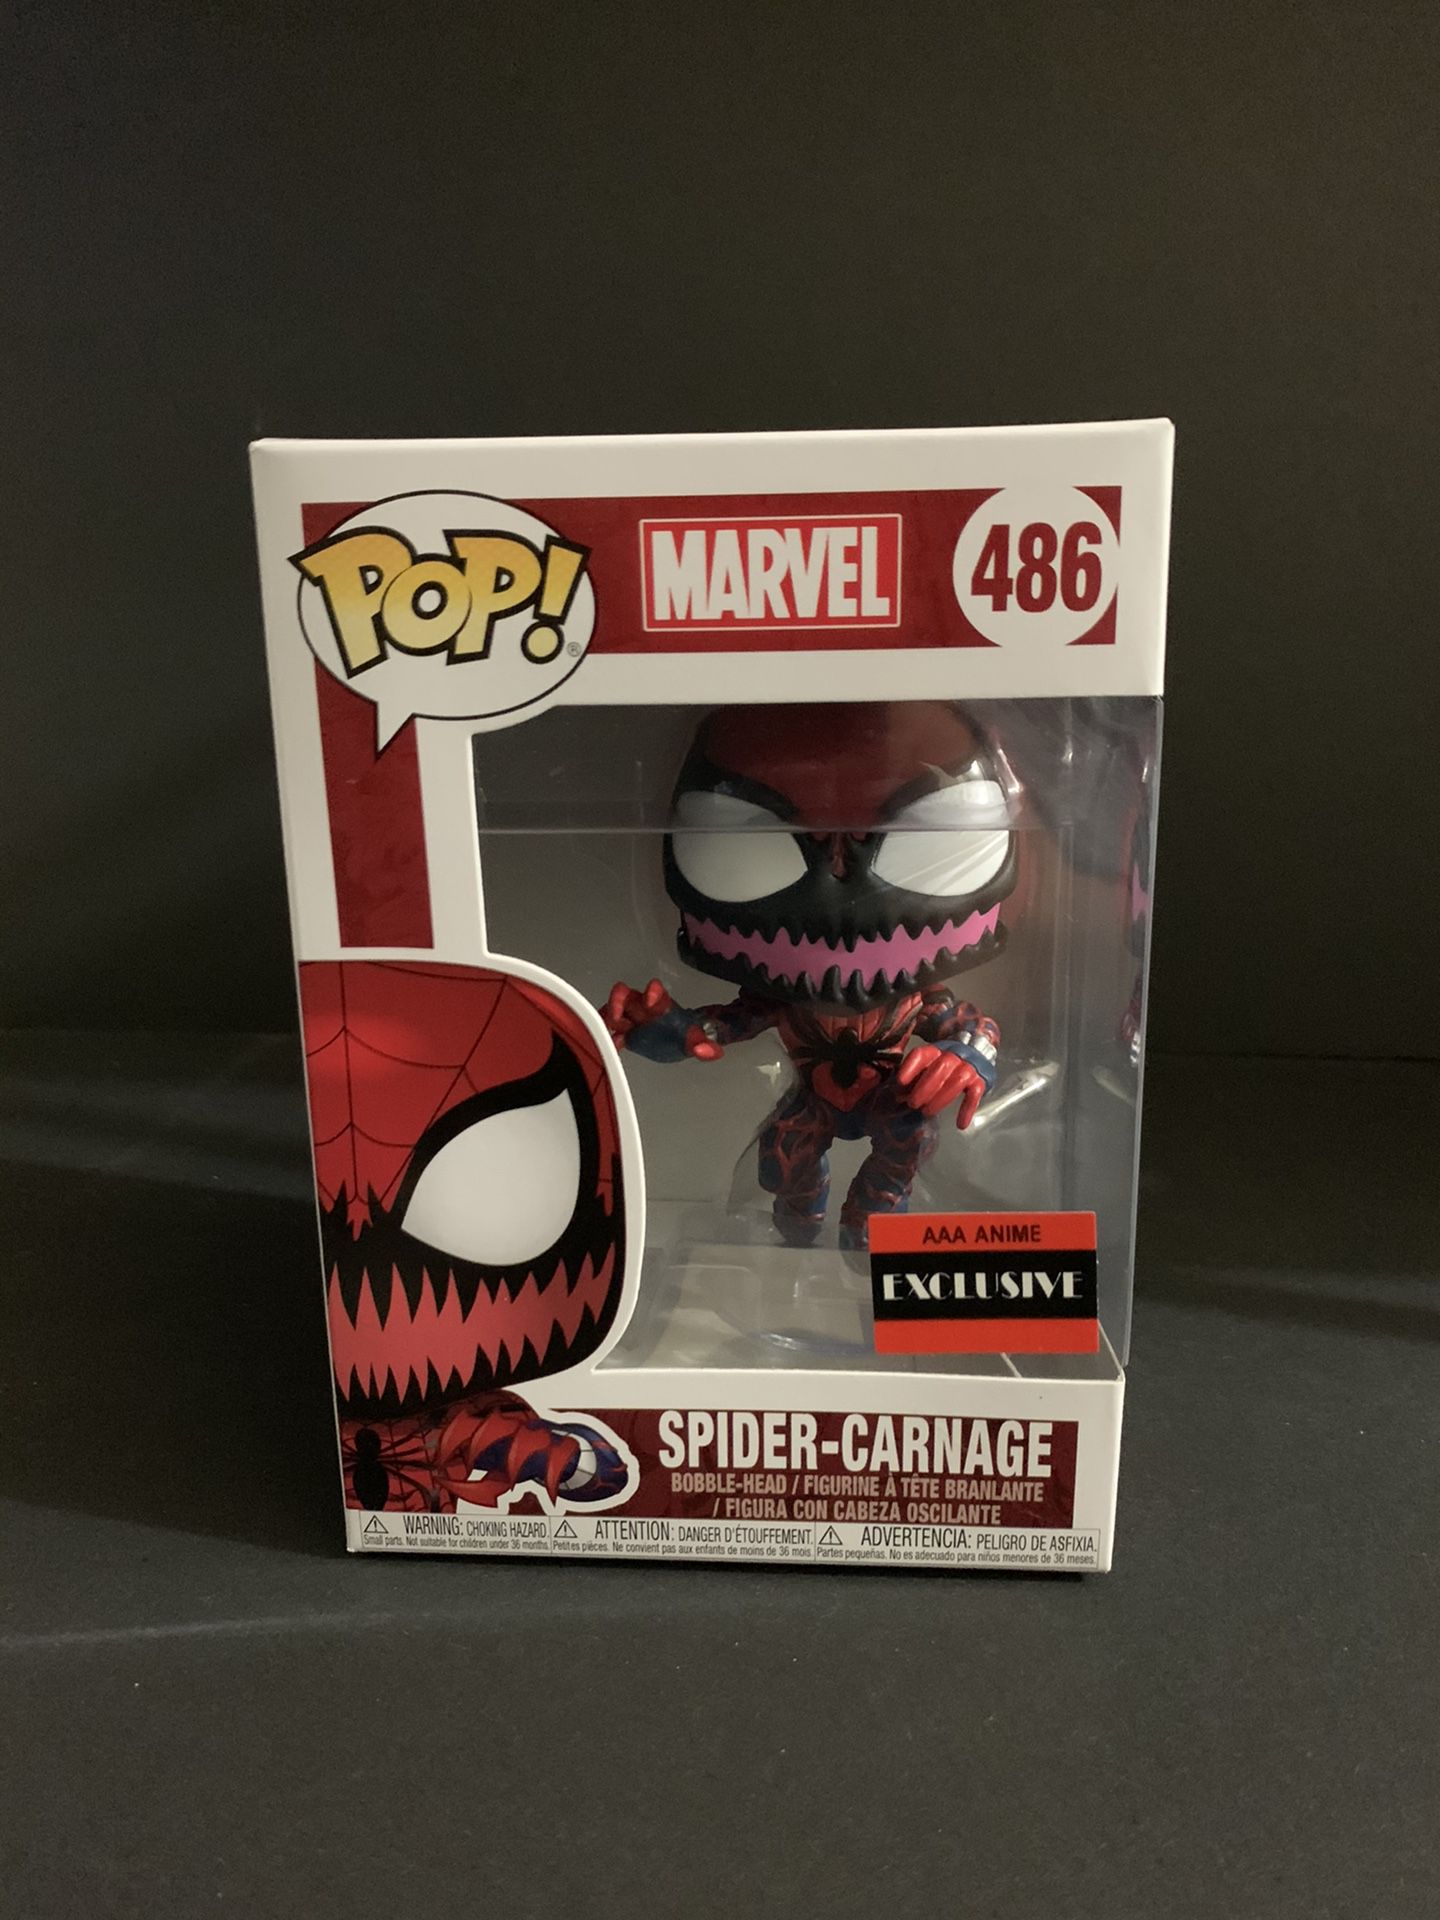 Funko Pop AAA Anime Exclusive Spider Carnage